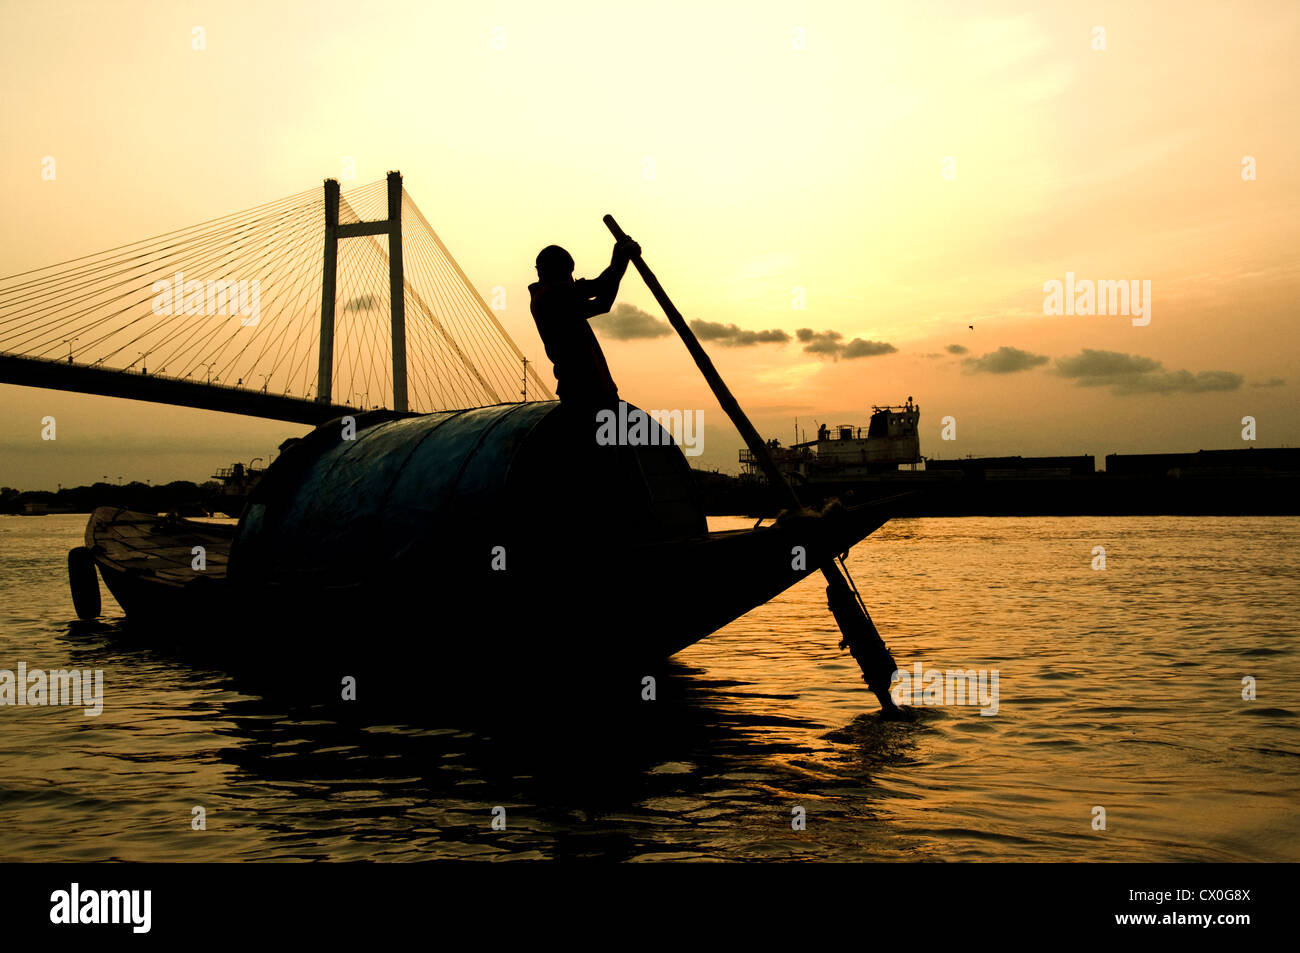 A boatman sails his boat at sun set on the river Ganges in Kolkata, India. Stock Photo